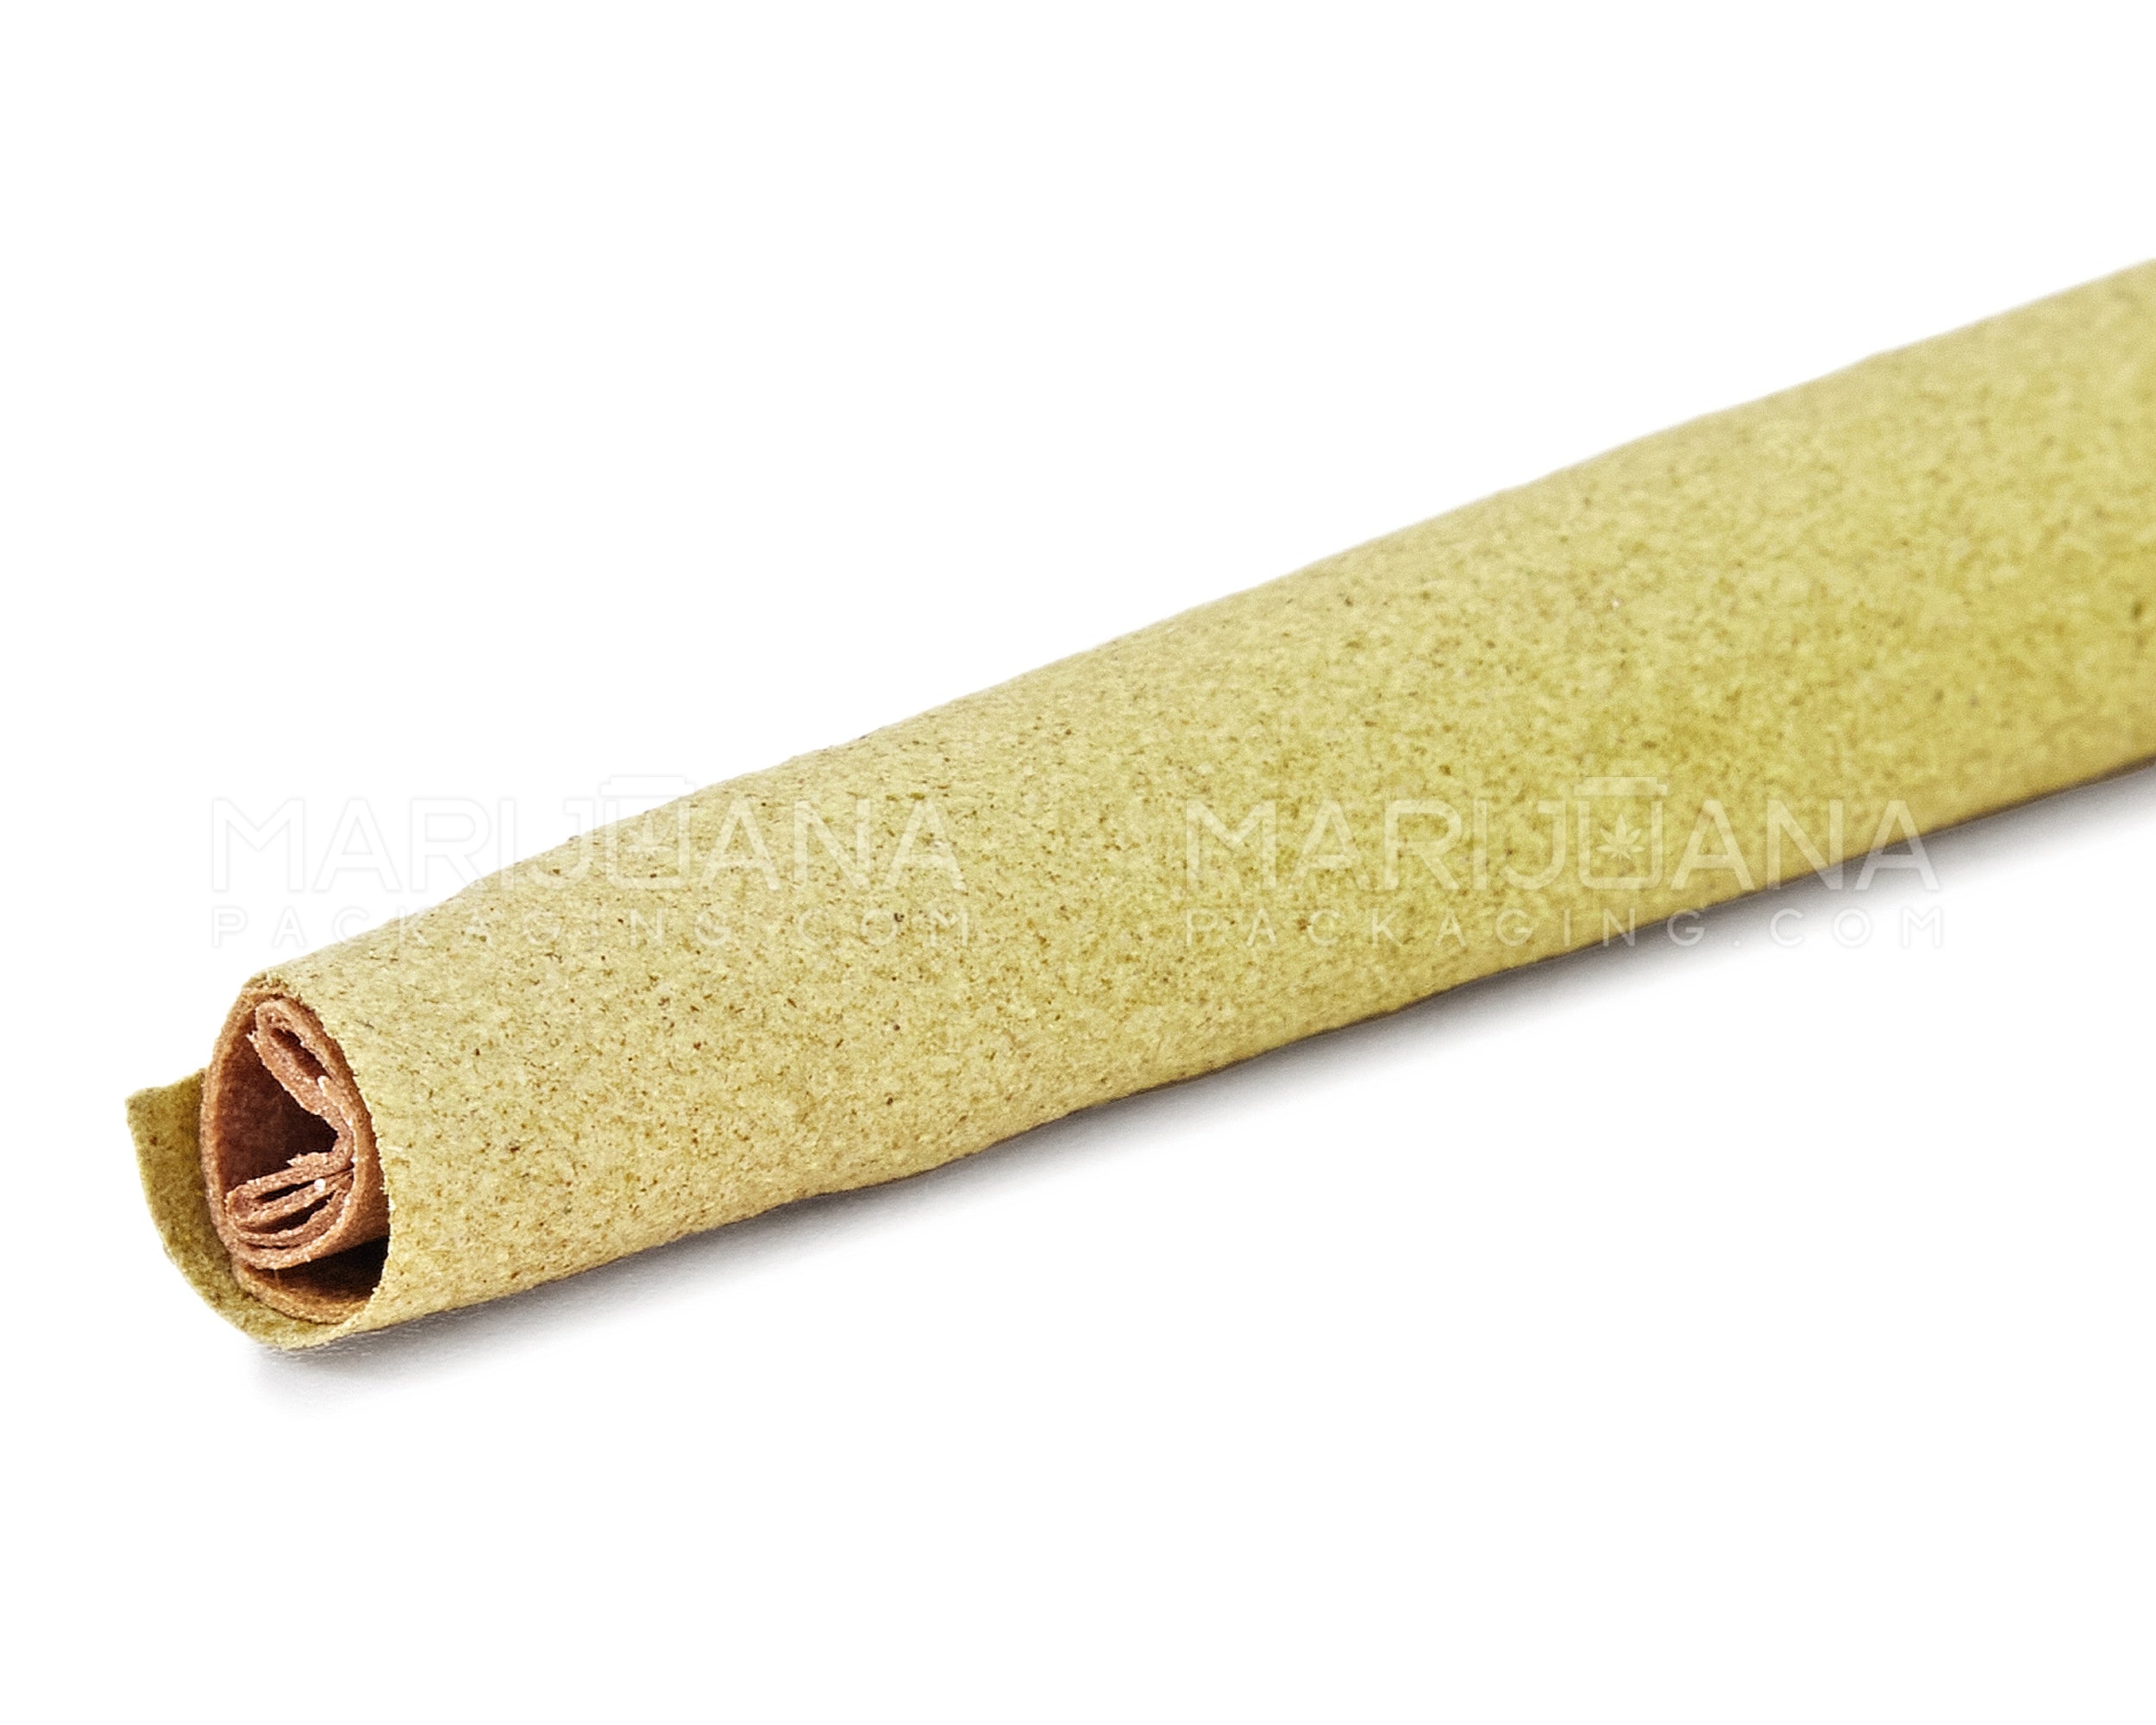 KUSH | 'Retail Display' Terpene Infused Herbal Conical Wraps | 160mm - Mimosa - 12 Count - 8